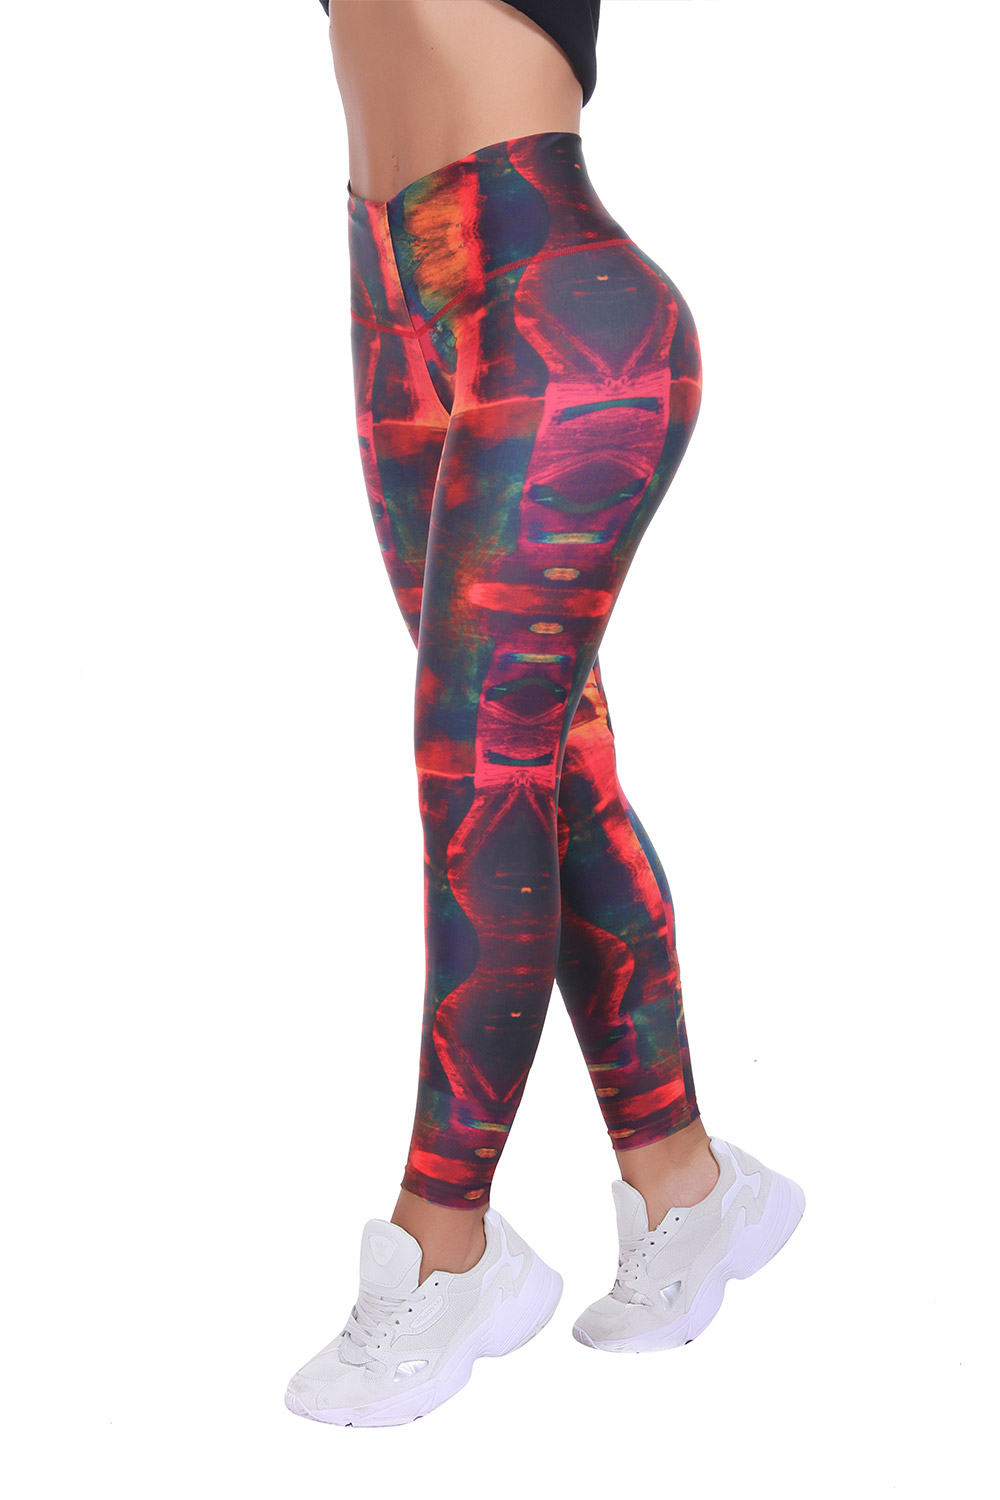 Multy colored stamped Sport Leggings with Inner Body Shaper – Resistant Dri Fit material